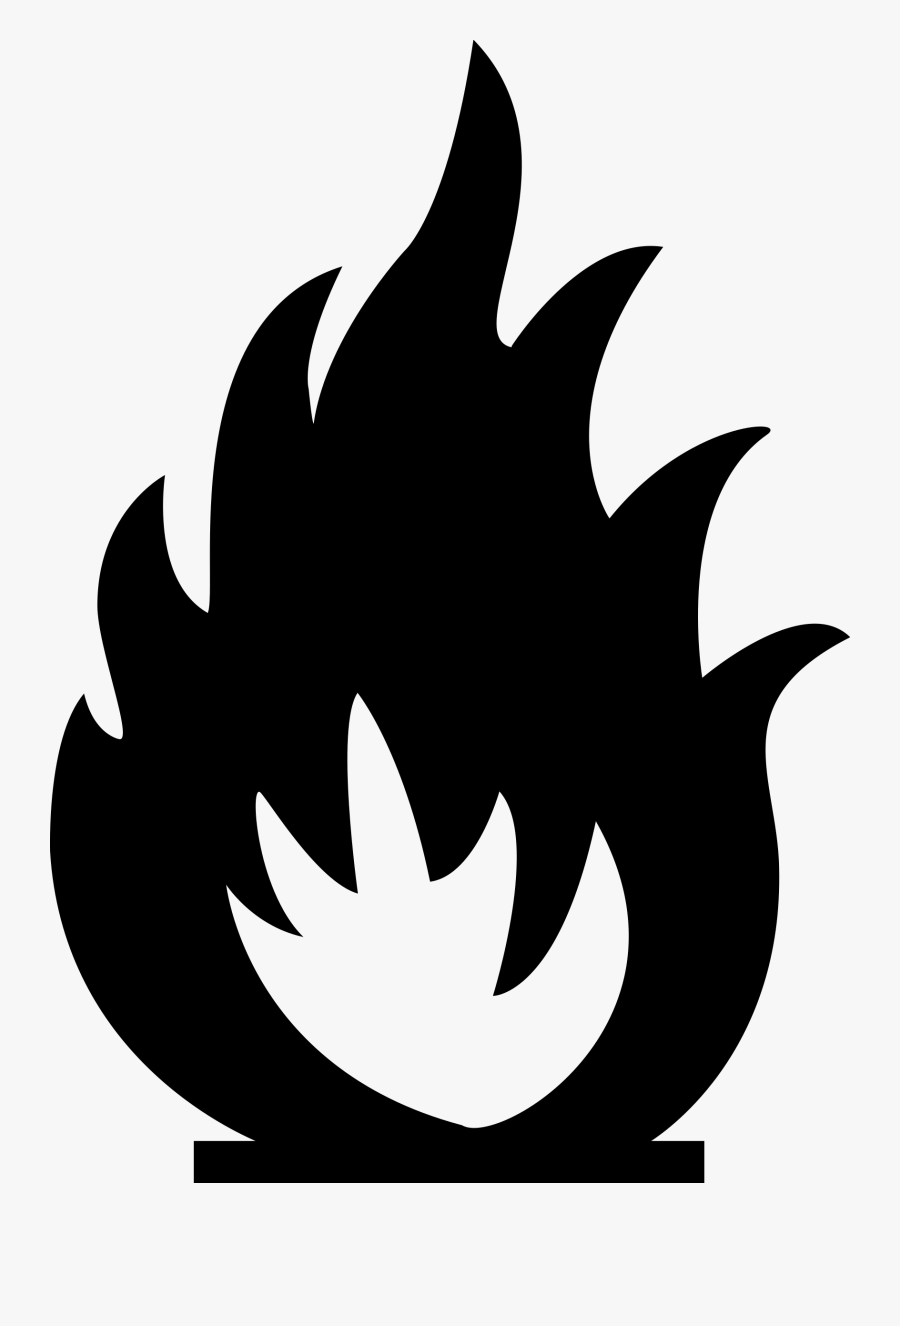 Camp Fire Clipart Api - Black And White Safety Symbols, Transparent Clipart